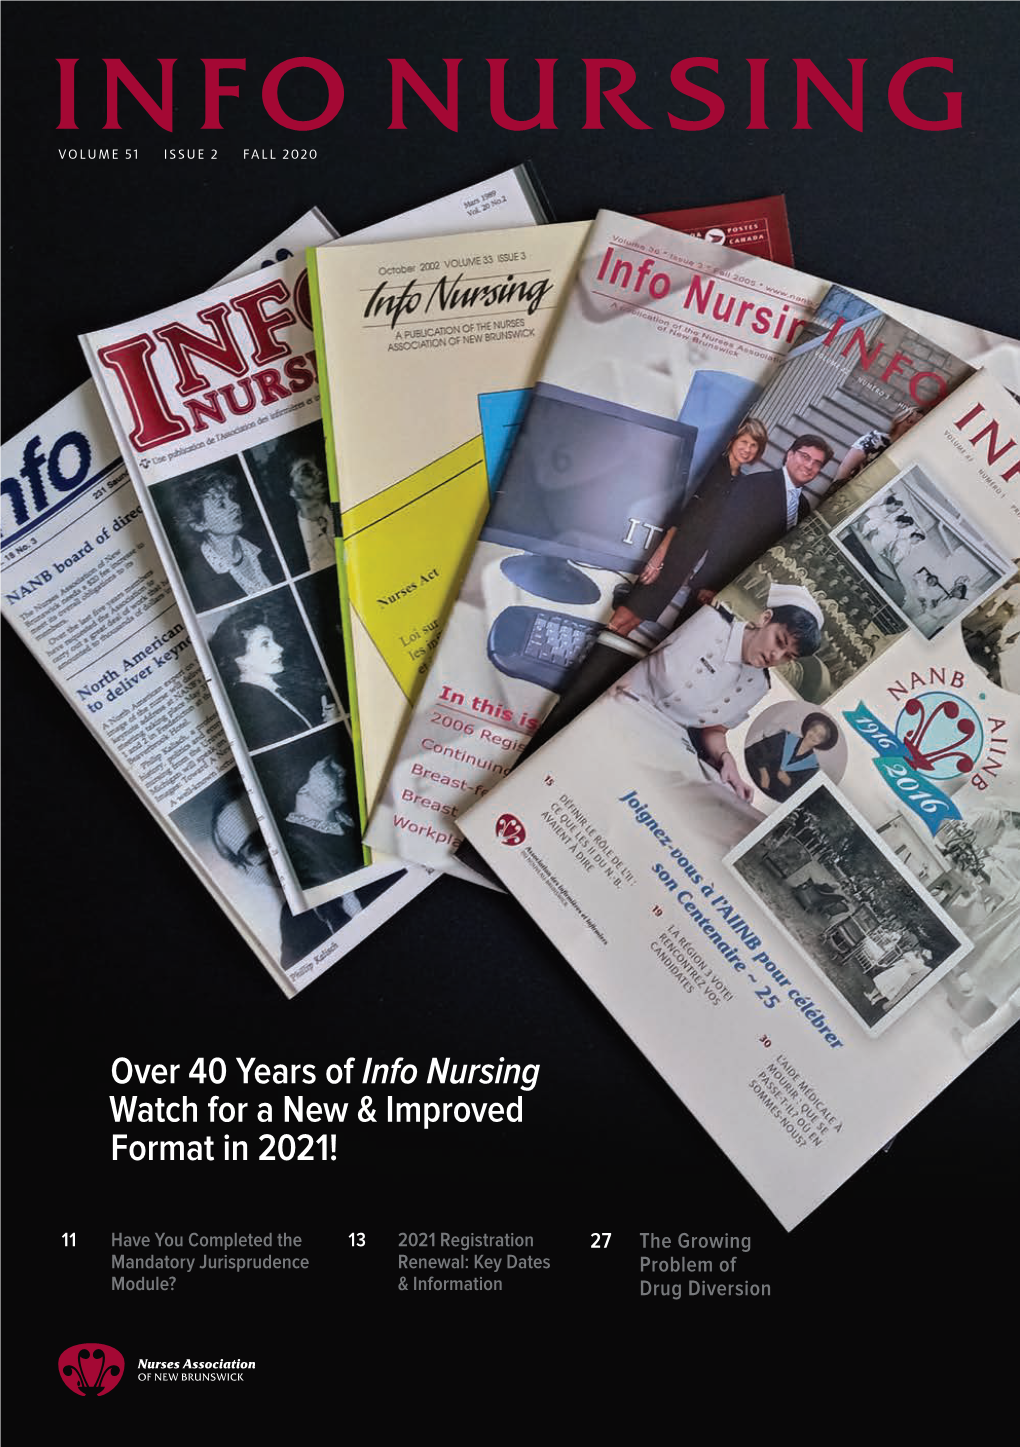 Over 40 Years of Info Nursing Watch for a New & Improved Format in 2021!